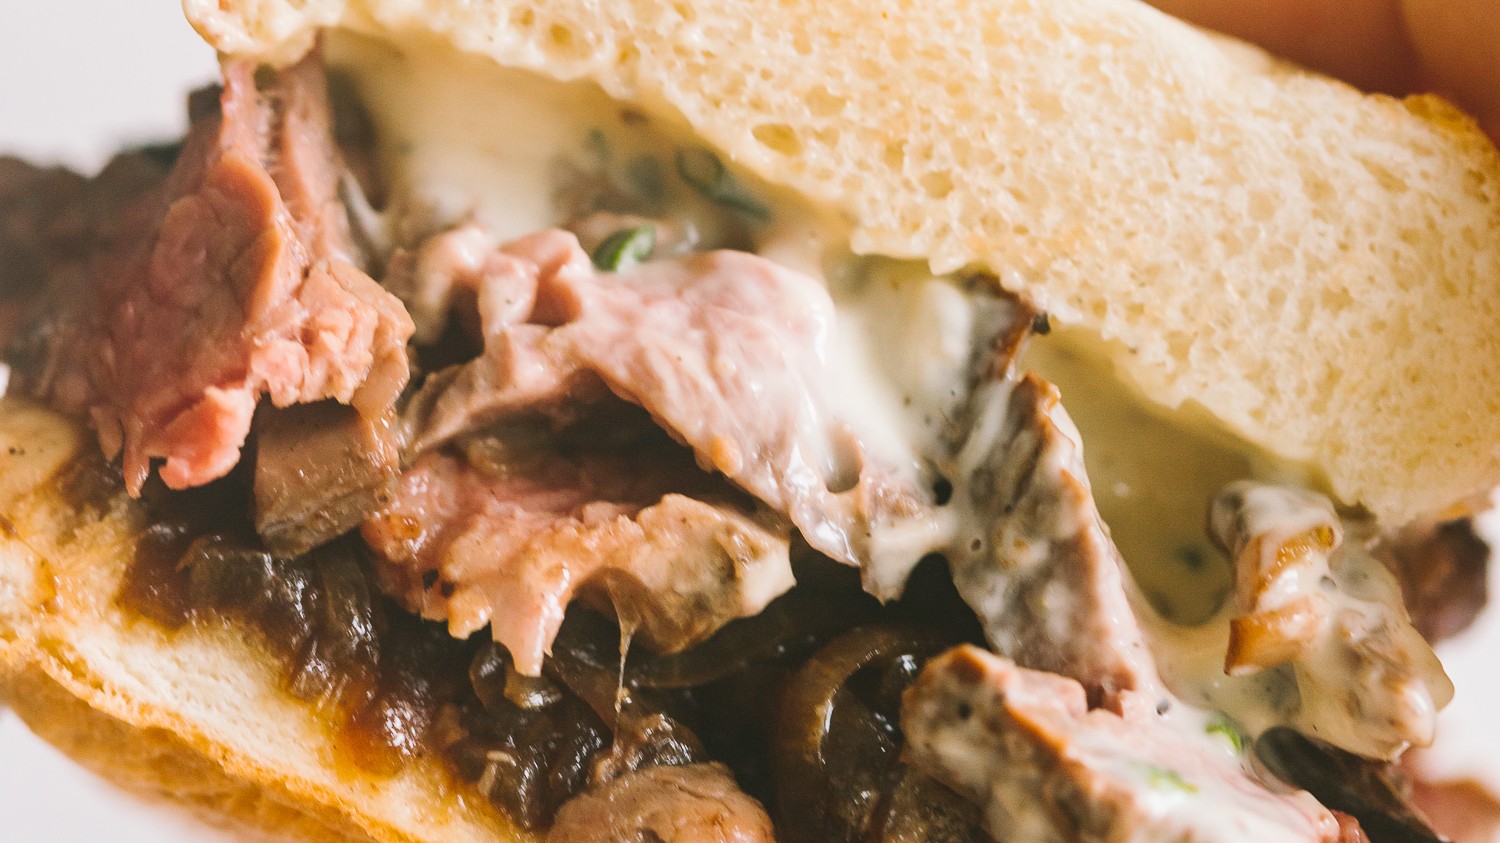 Image of French Dip Sandwich with Spicy Horseradish Mayo